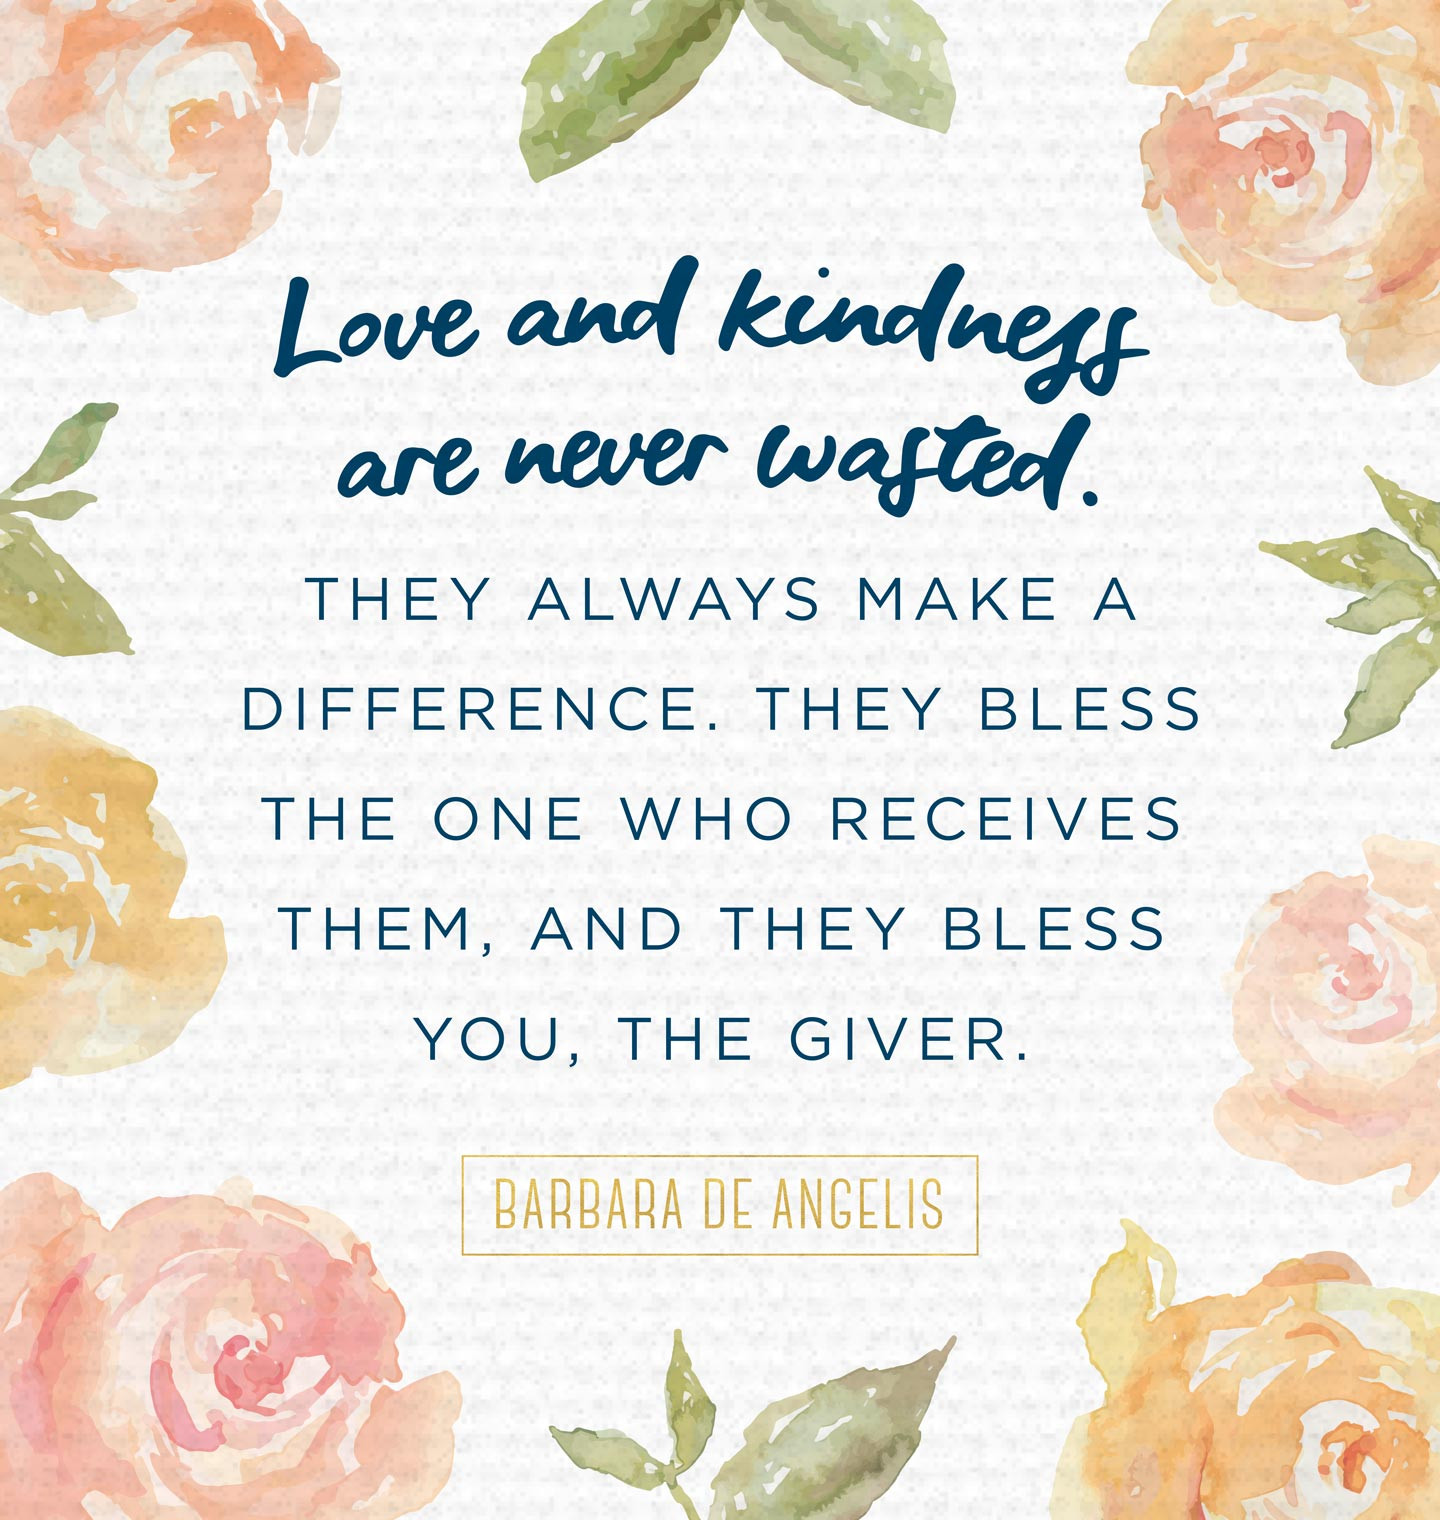 Quotes For Kindness
 30 Inspiring Kindness Quotes That Will Enlighten You FTD